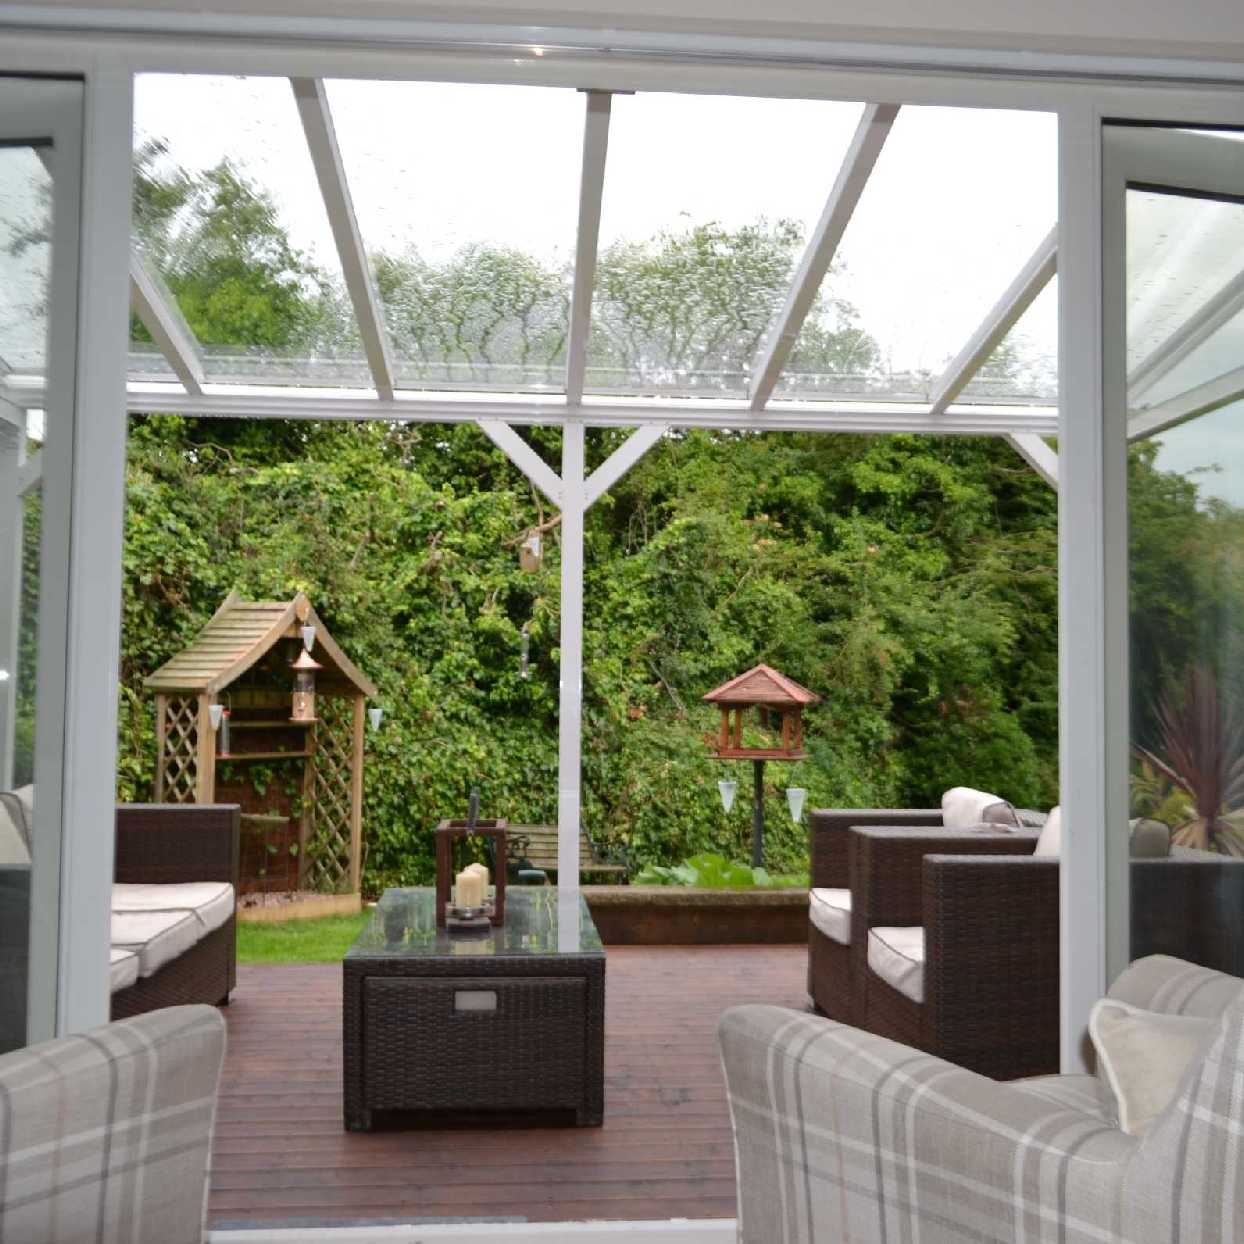 Great selection of Omega Smart Lean-To Canopy, White UNGLAZED for 6mm Glazing - 9.8m (W) x 2.5m (P), (5) Supporting Posts